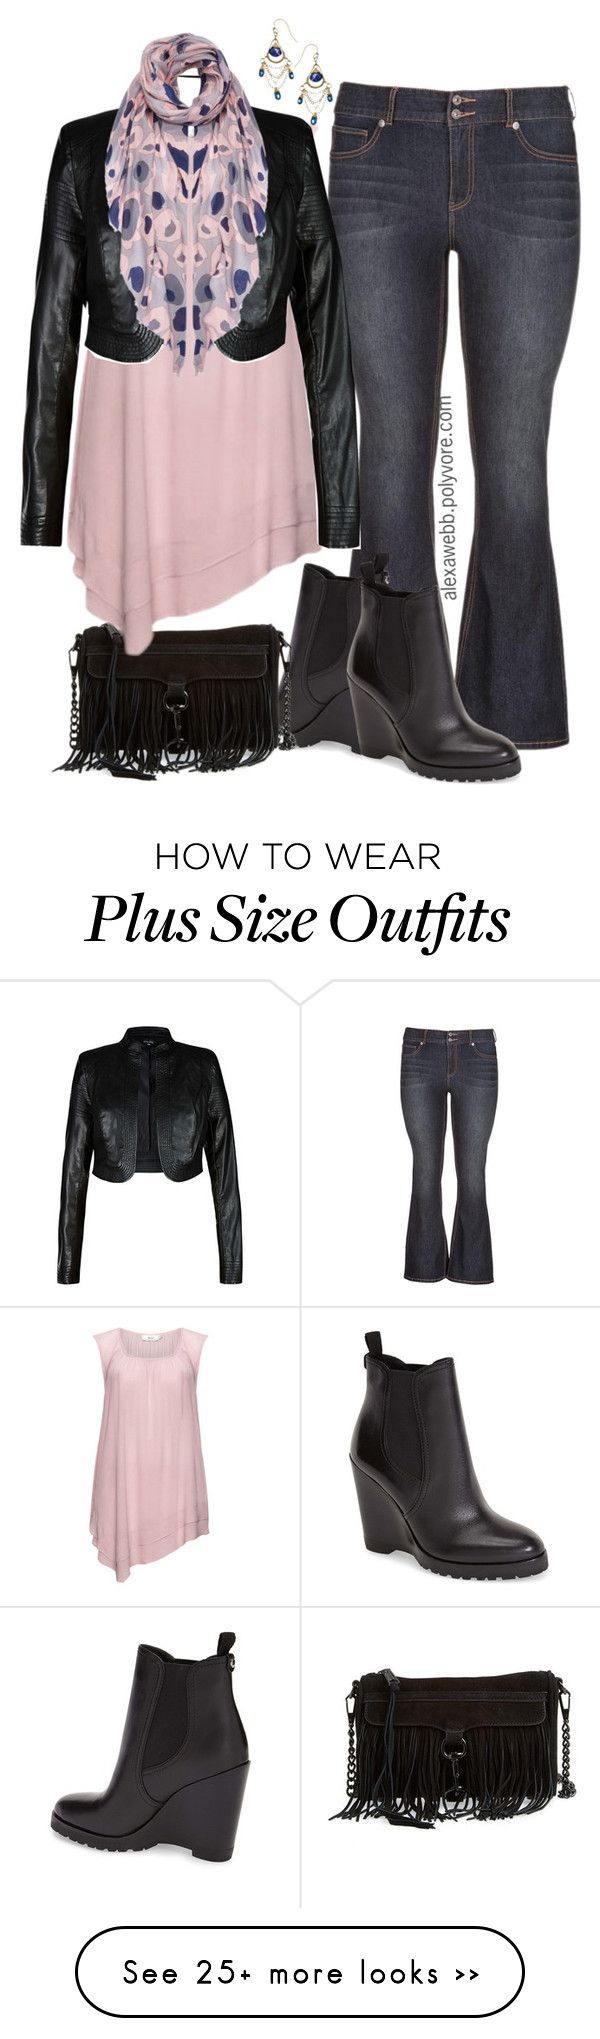 “Plus Size Flares” by alexawebb on Polyvore featuring maurices, MICHAEL Michael Kors, Rebecca Minkoff, Ziz